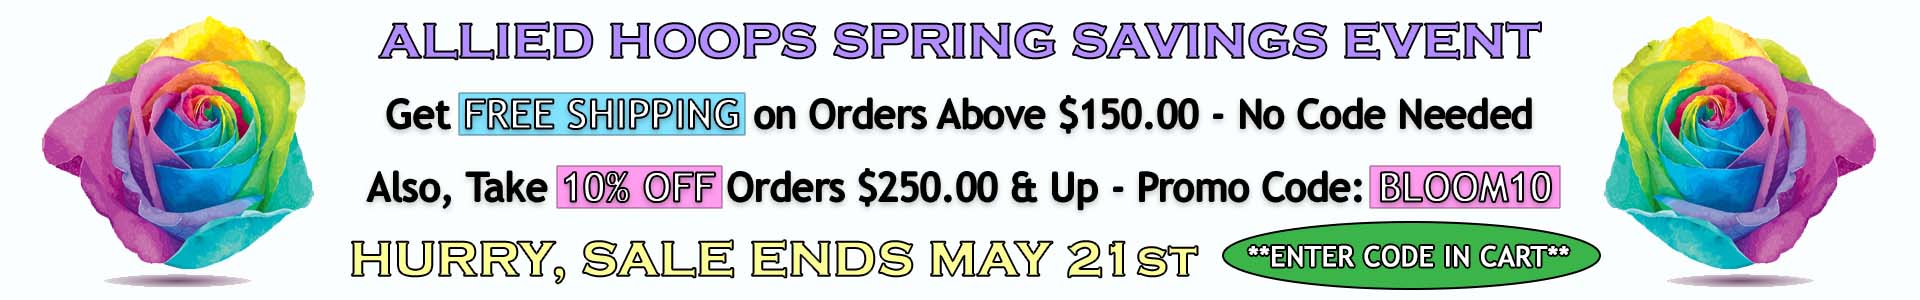 SPRING SAVINGS EVENT - Get FREE SHIPPING on Orders Above $150! Also, Take 10% OFF Orders Above $250!